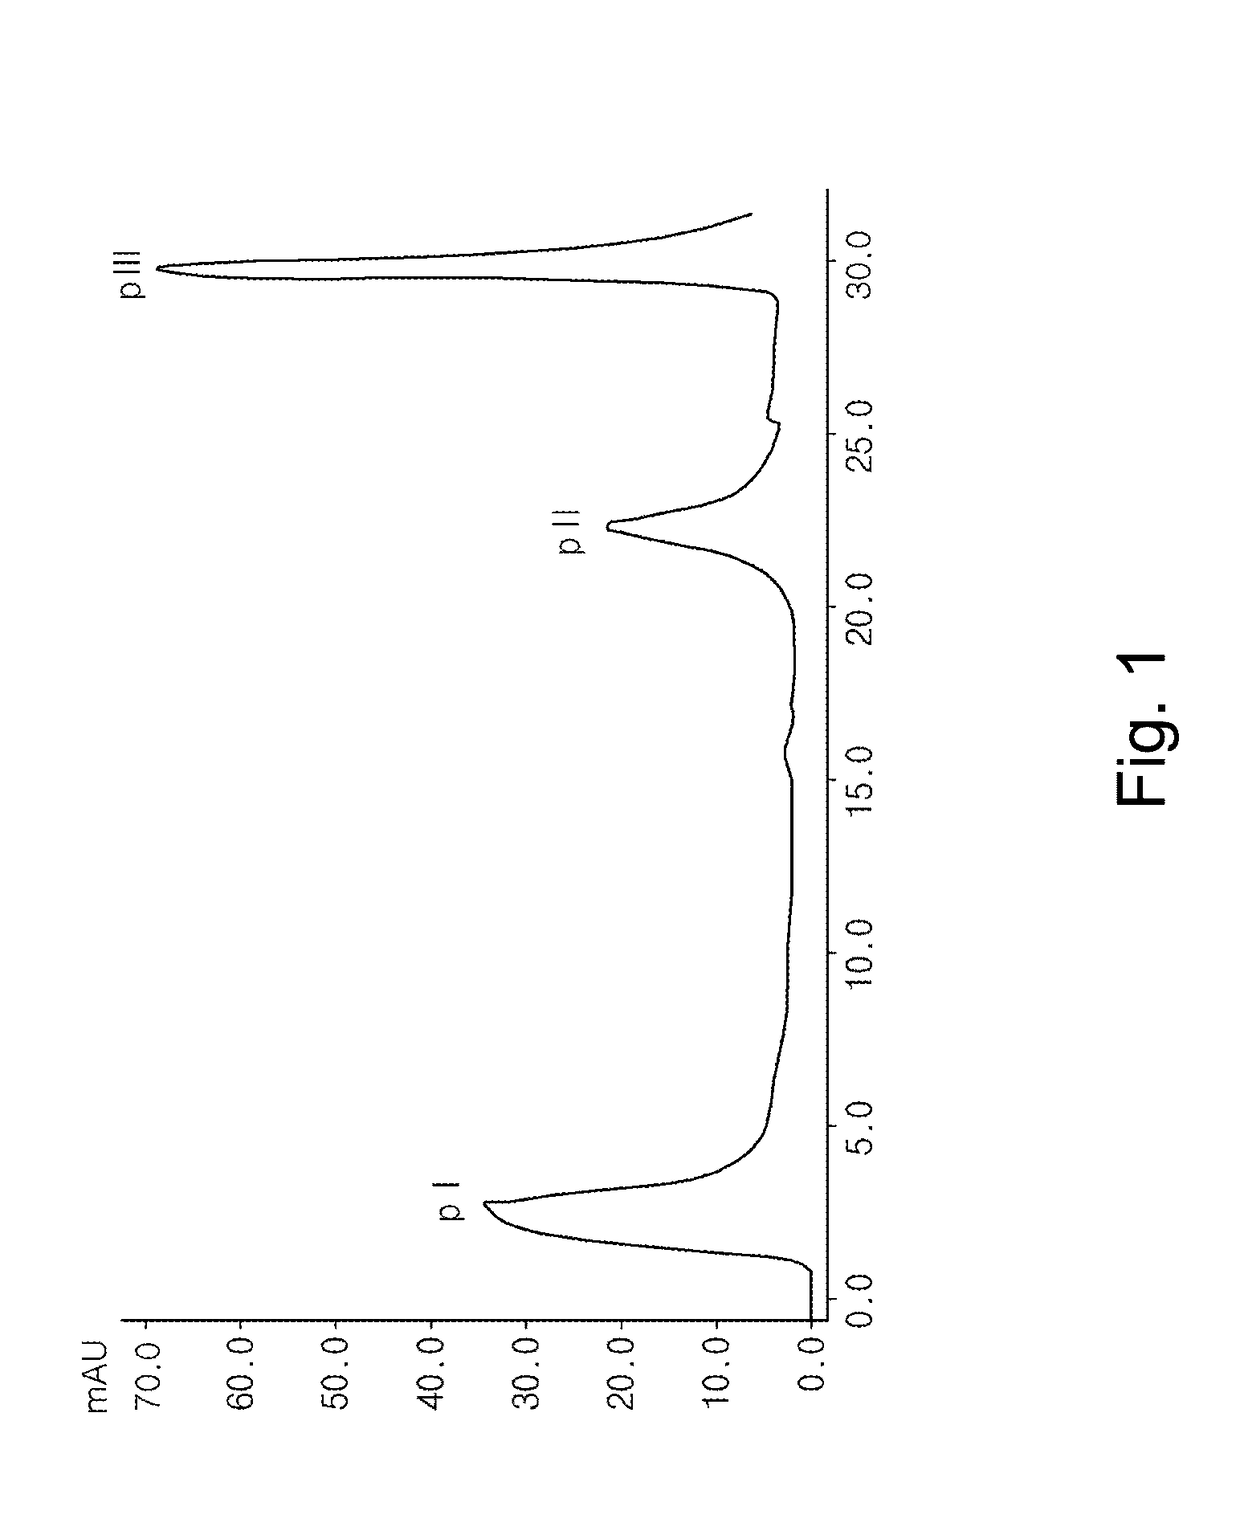 Non-diffusive botulinum toxin causing local muscle paralysis, and purification method thereof